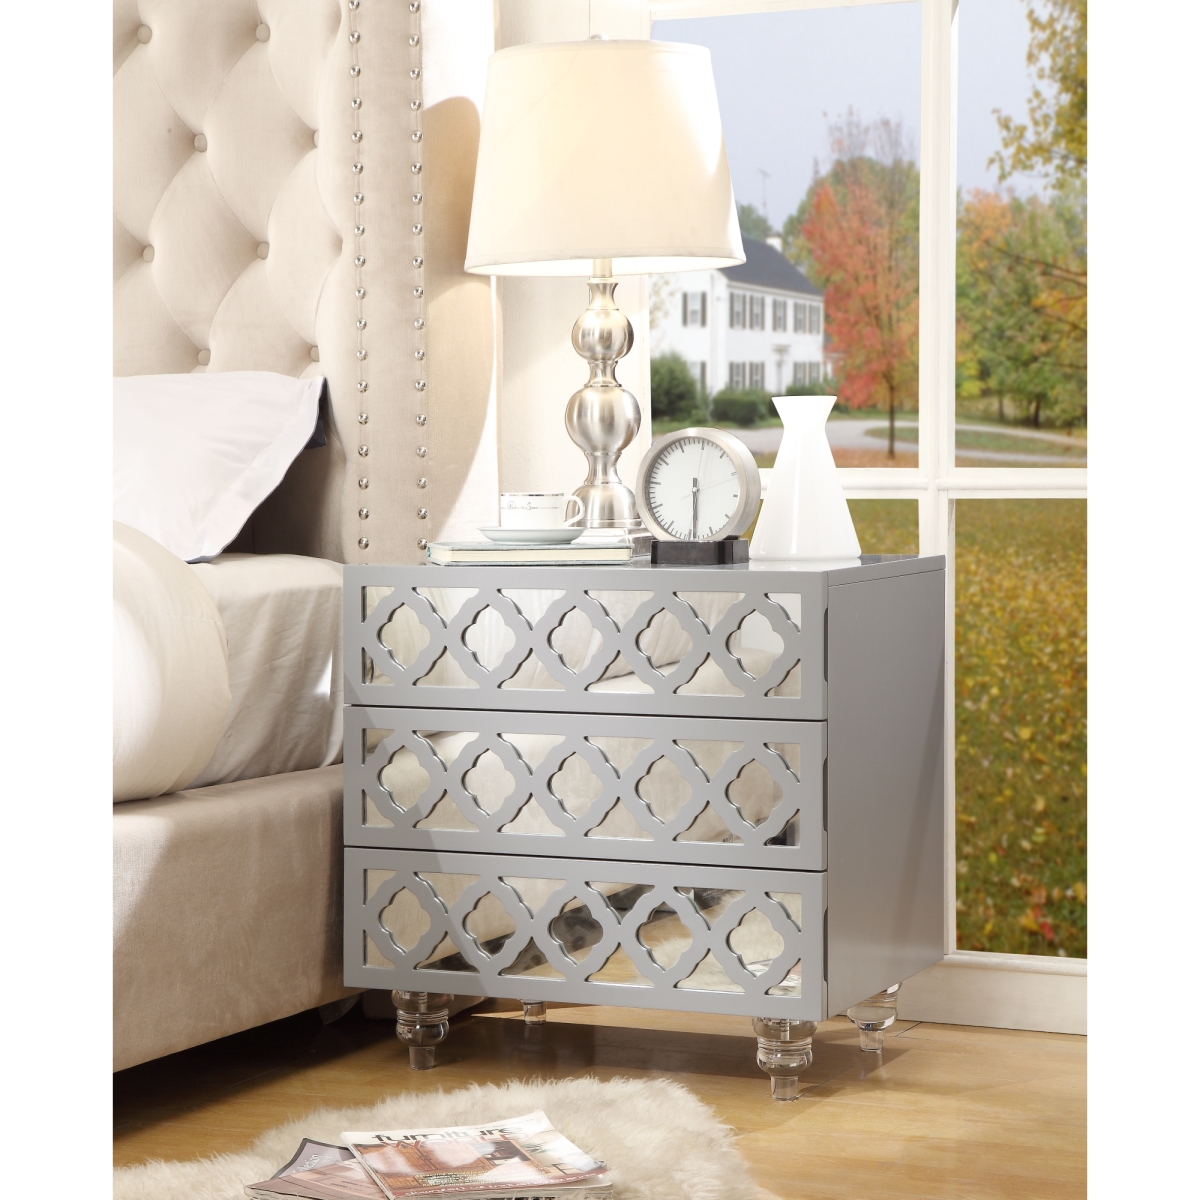 Serenity Mdf Wood Modern Lacquer Lucite Leg Side Table Accent Table & Nightstand - Light Grey